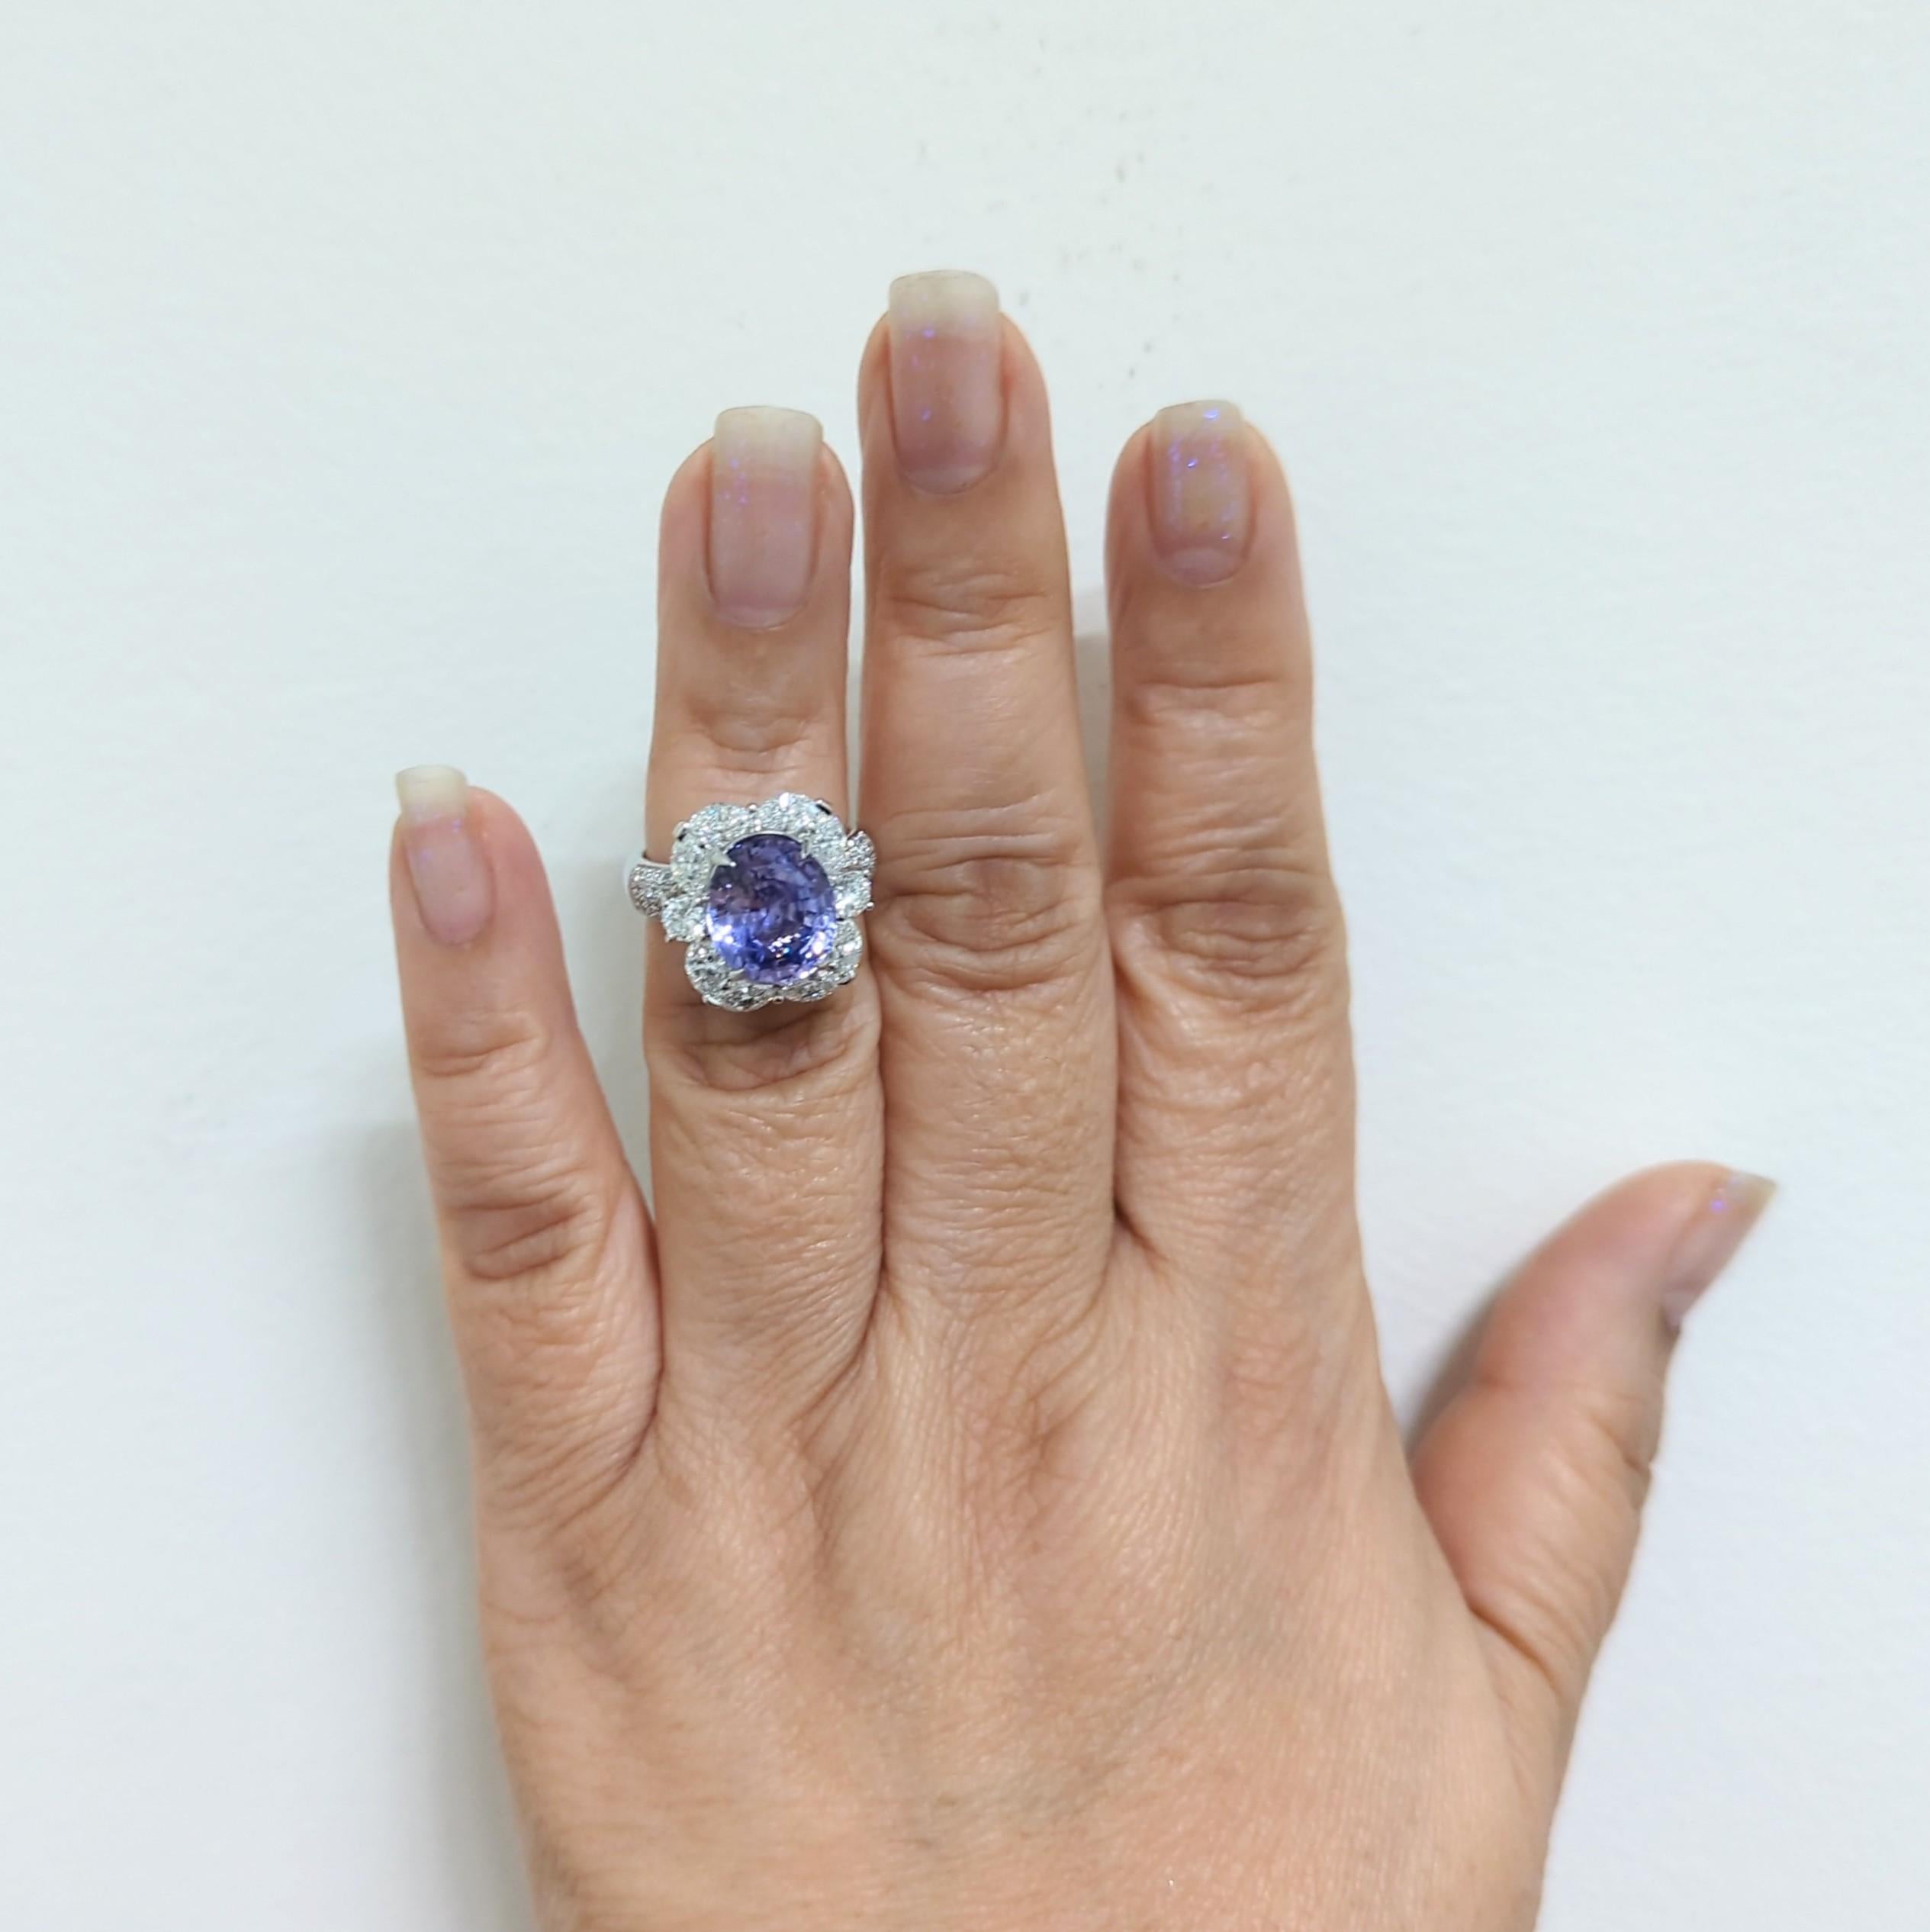 Gorgeous GIA unheated 6.68 ct. purple sapphire oval with good quality white diamond marquises and rounds.  Handmade in 18k white gold.  Ring size 6.25.  GIA certificate included.